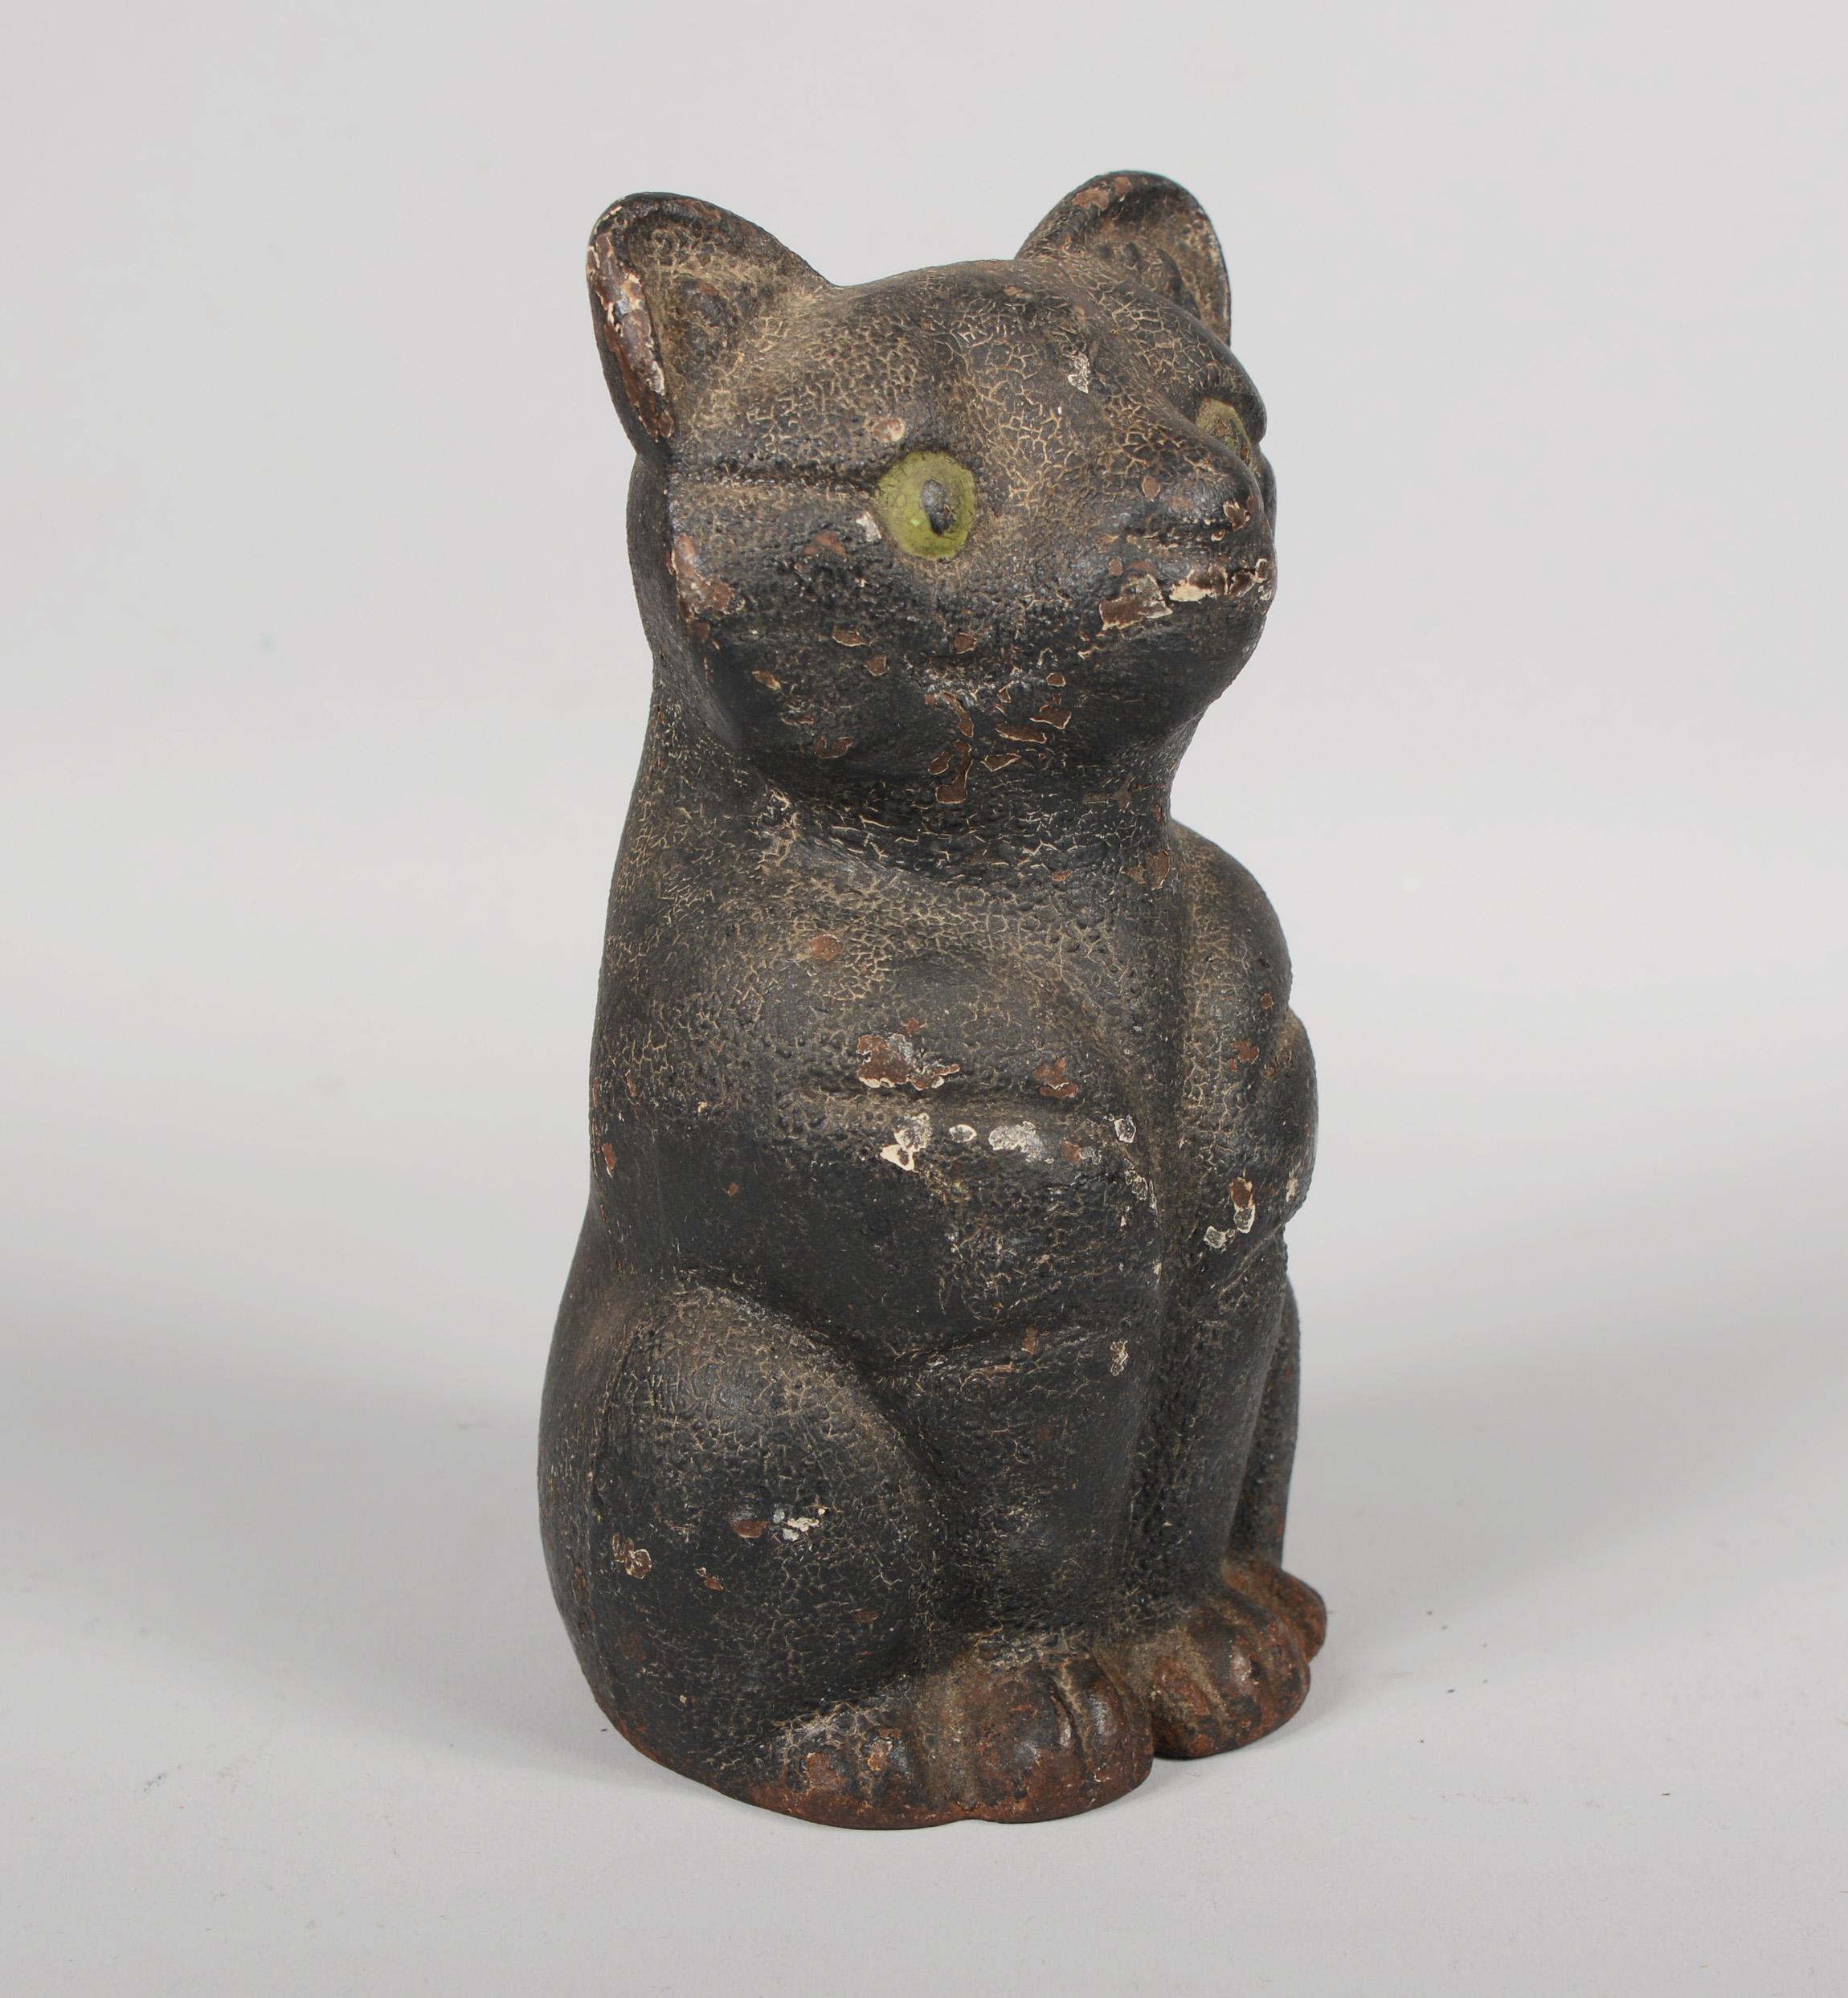 Cast iron black cat door stop. This cat retains the original paint with great crazing and lots of patina.